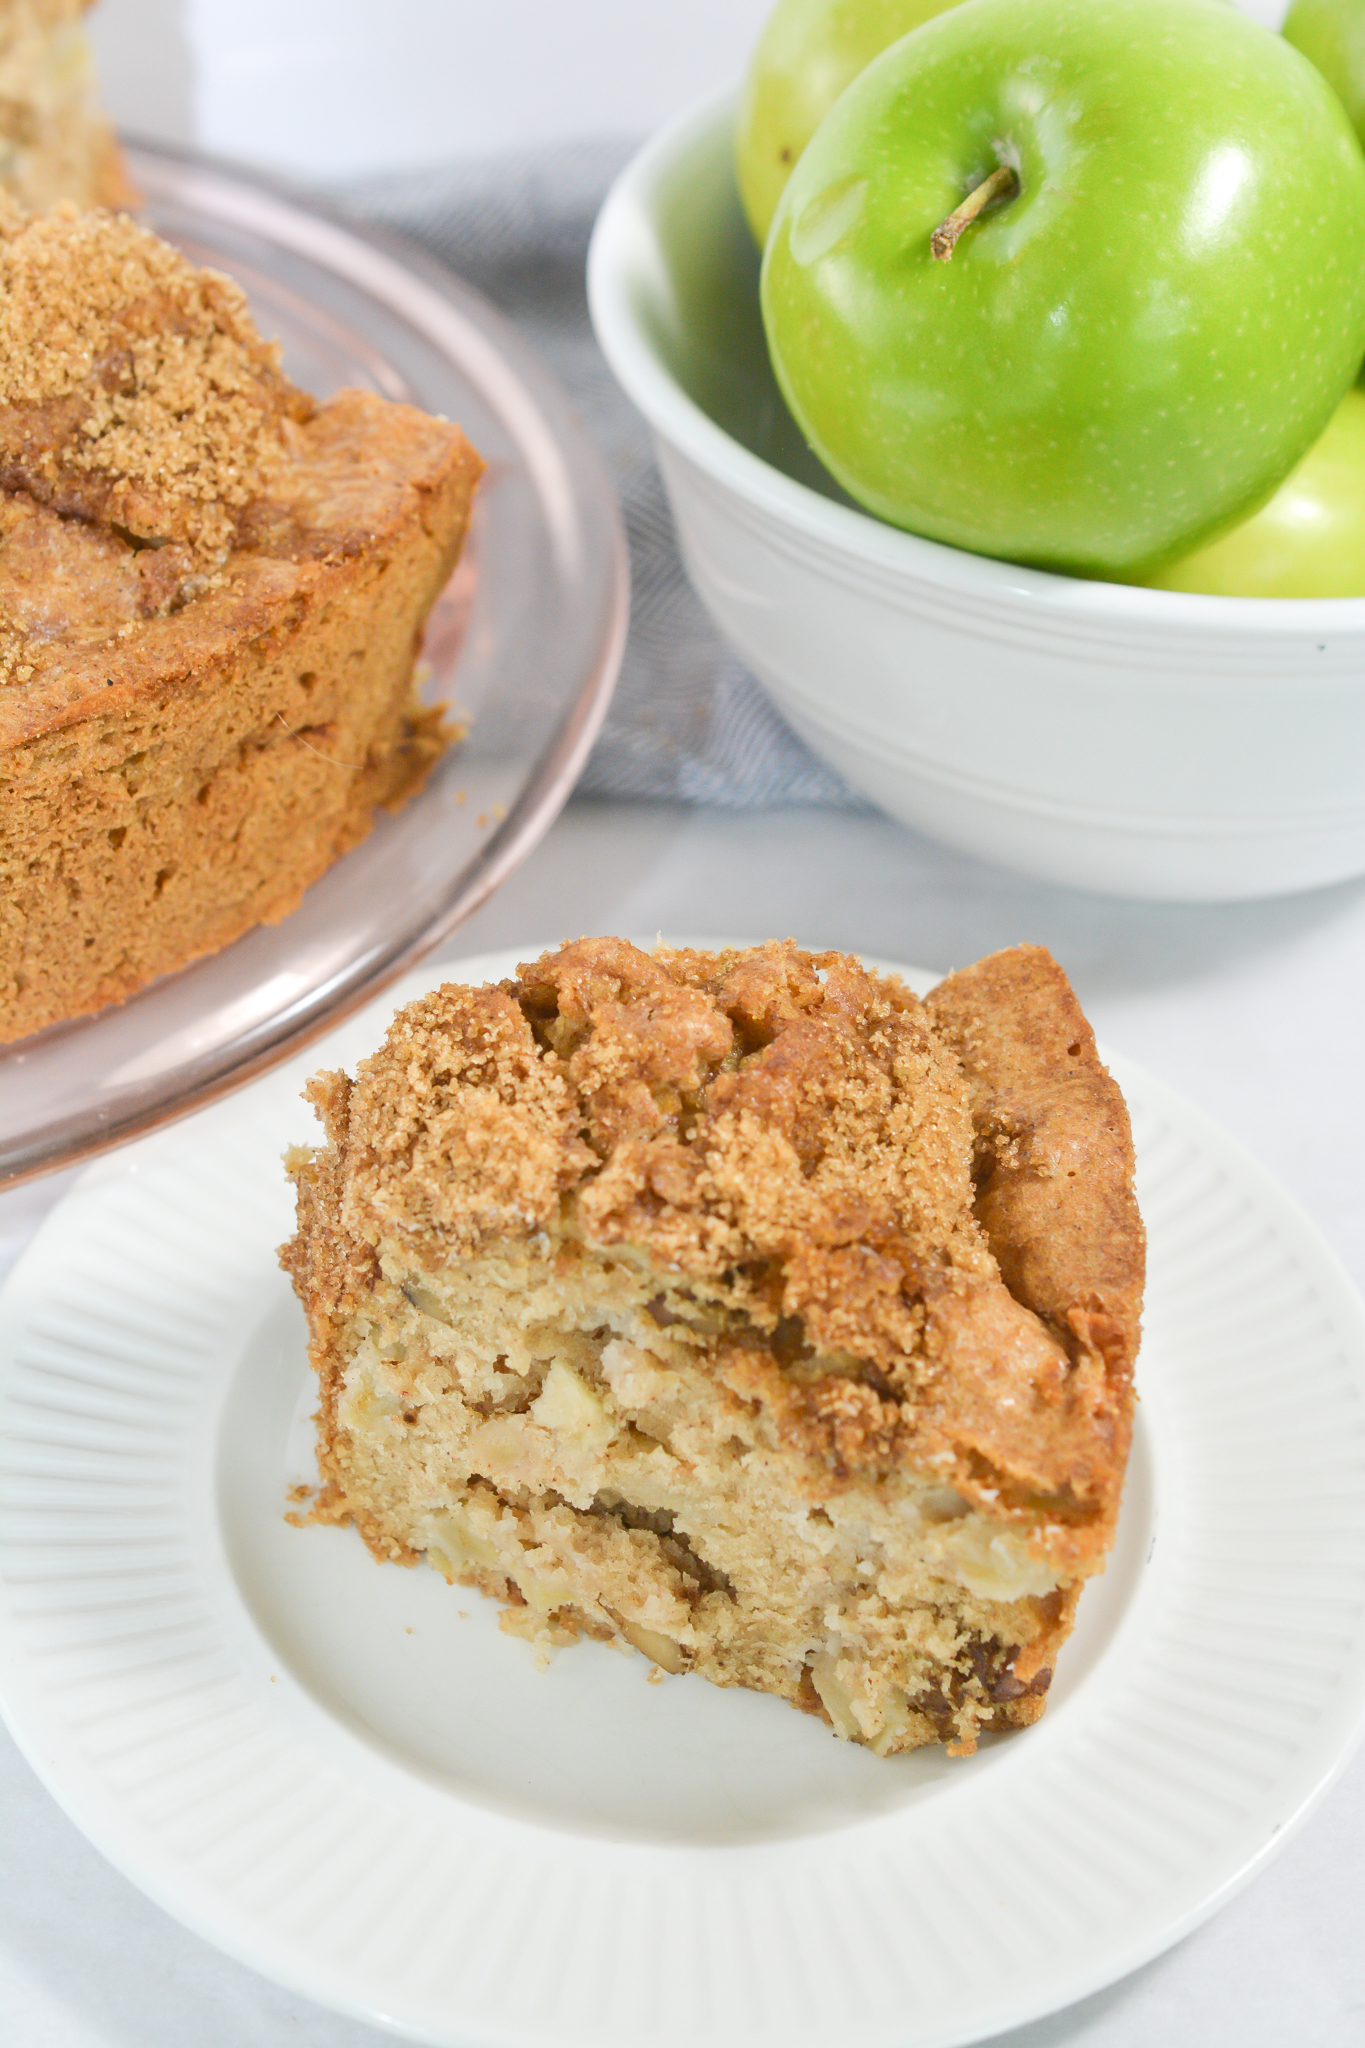 Apple Tea Cake with a bowl of green apples in the background